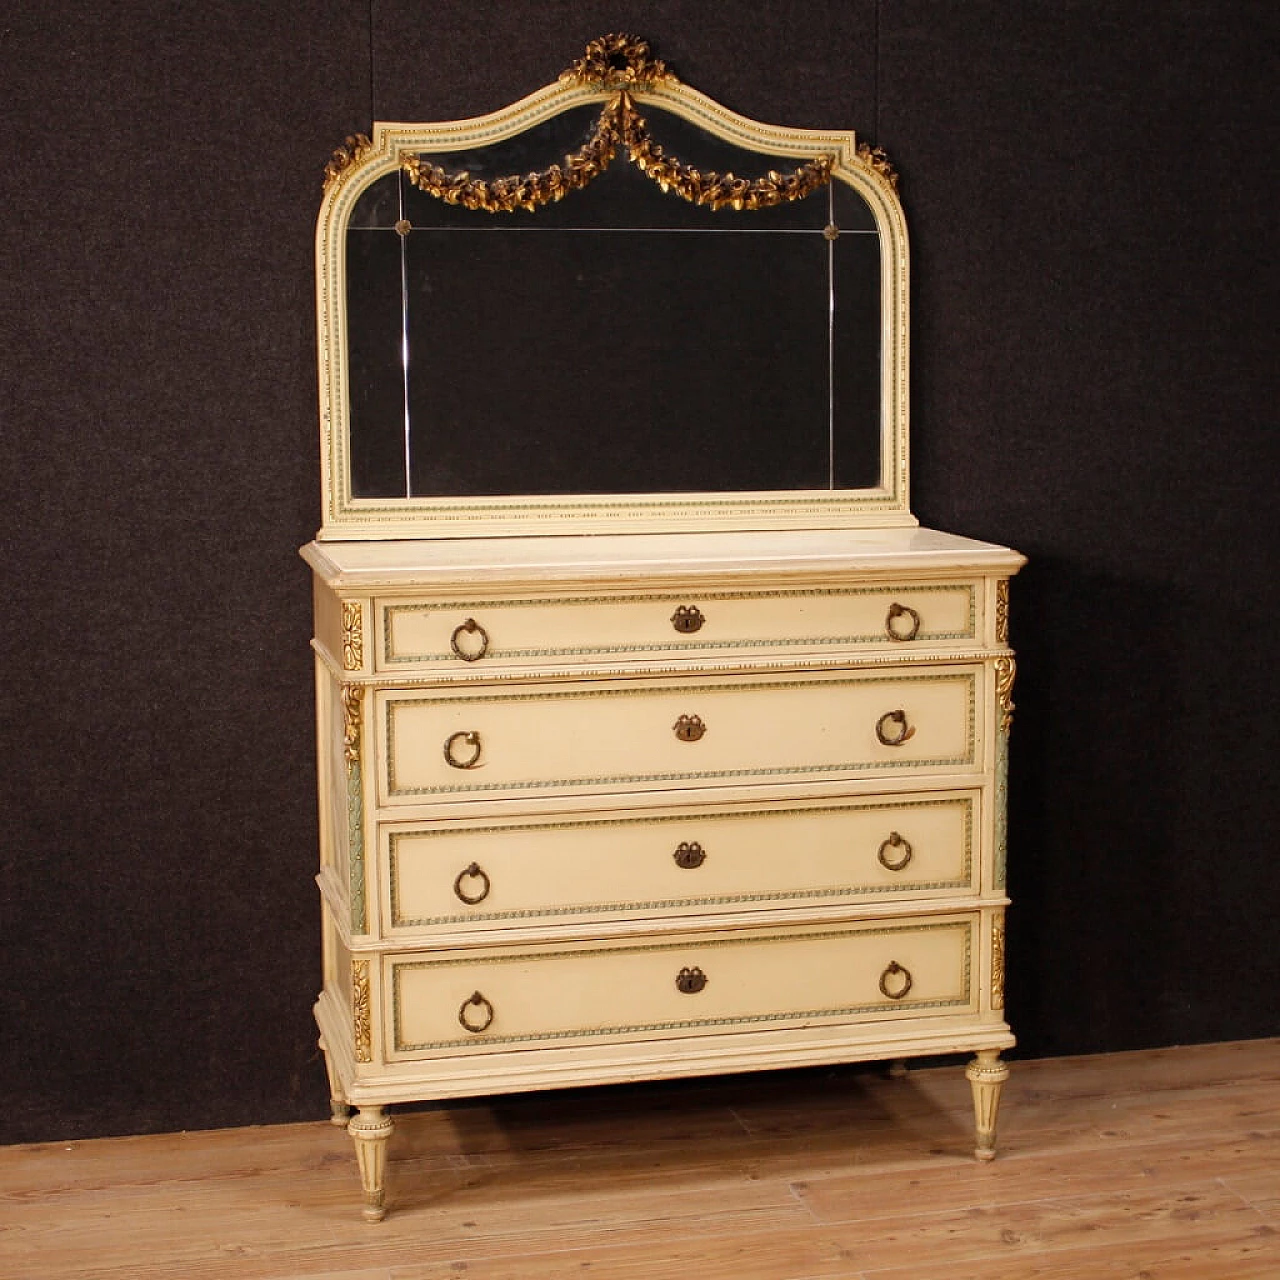 Louis XVI style lacquered and gilded wood dresser with mirror 1